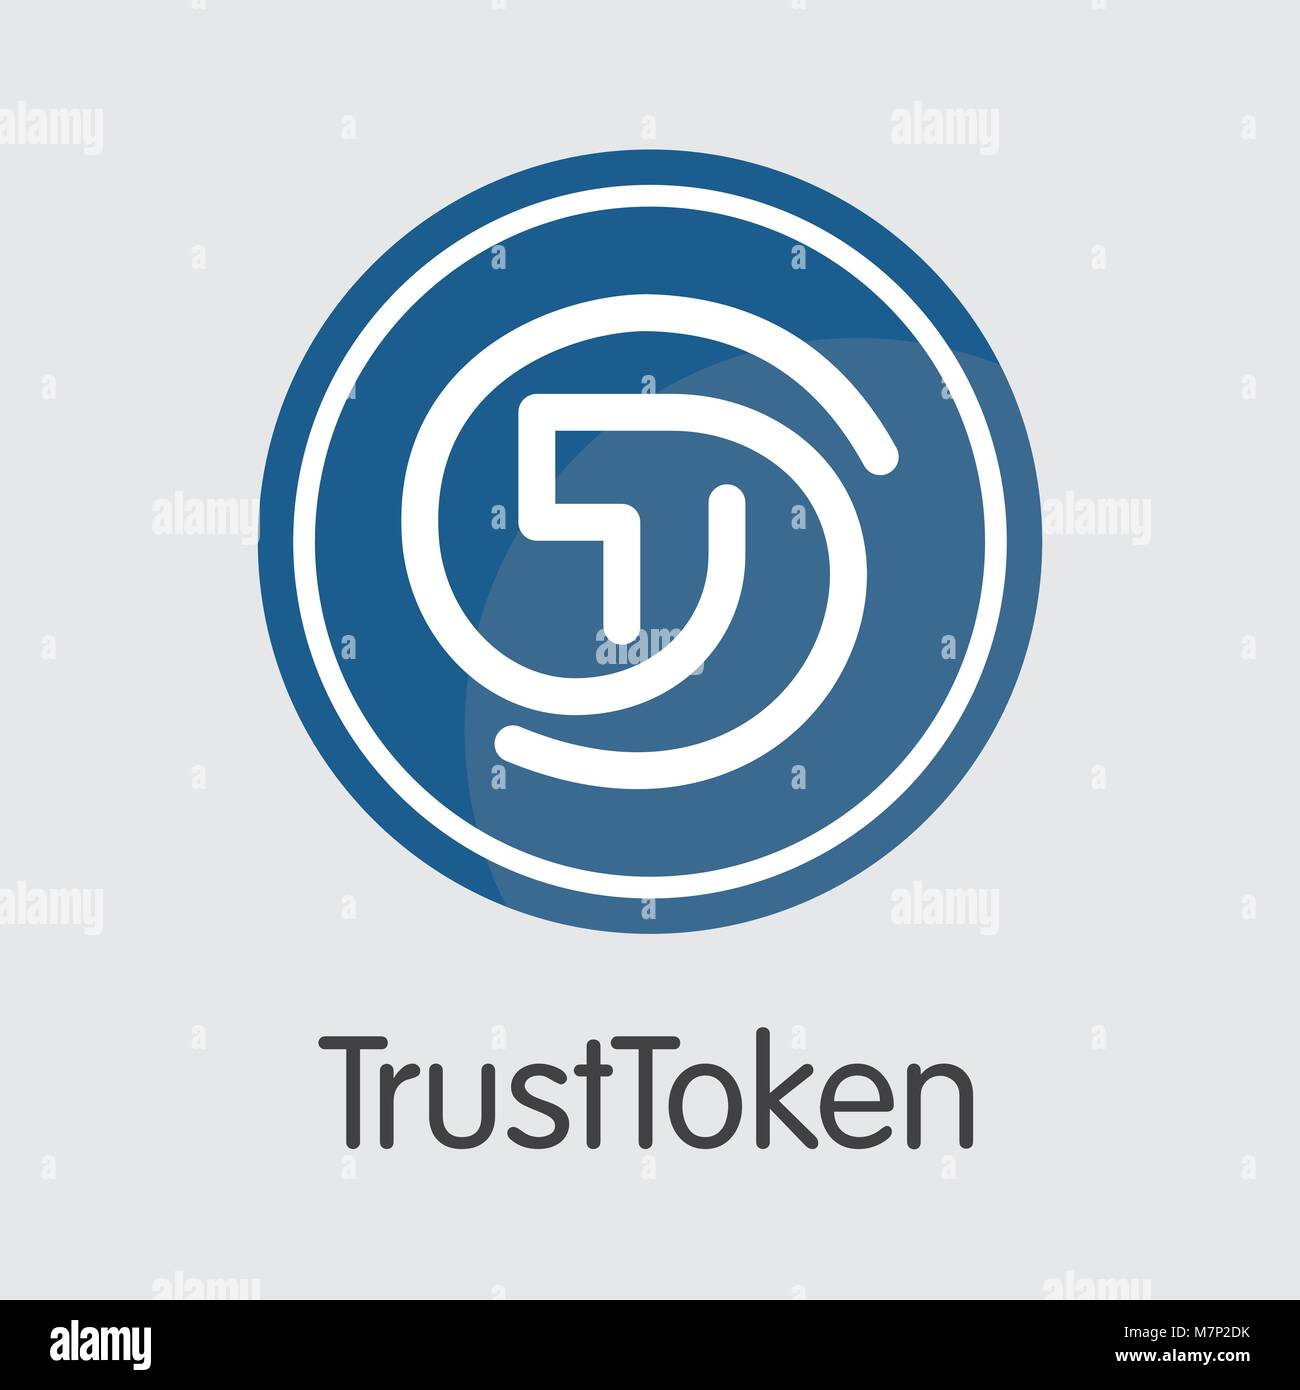 Trusttoken - Cryptographic Currency Illustration. Stock Vector